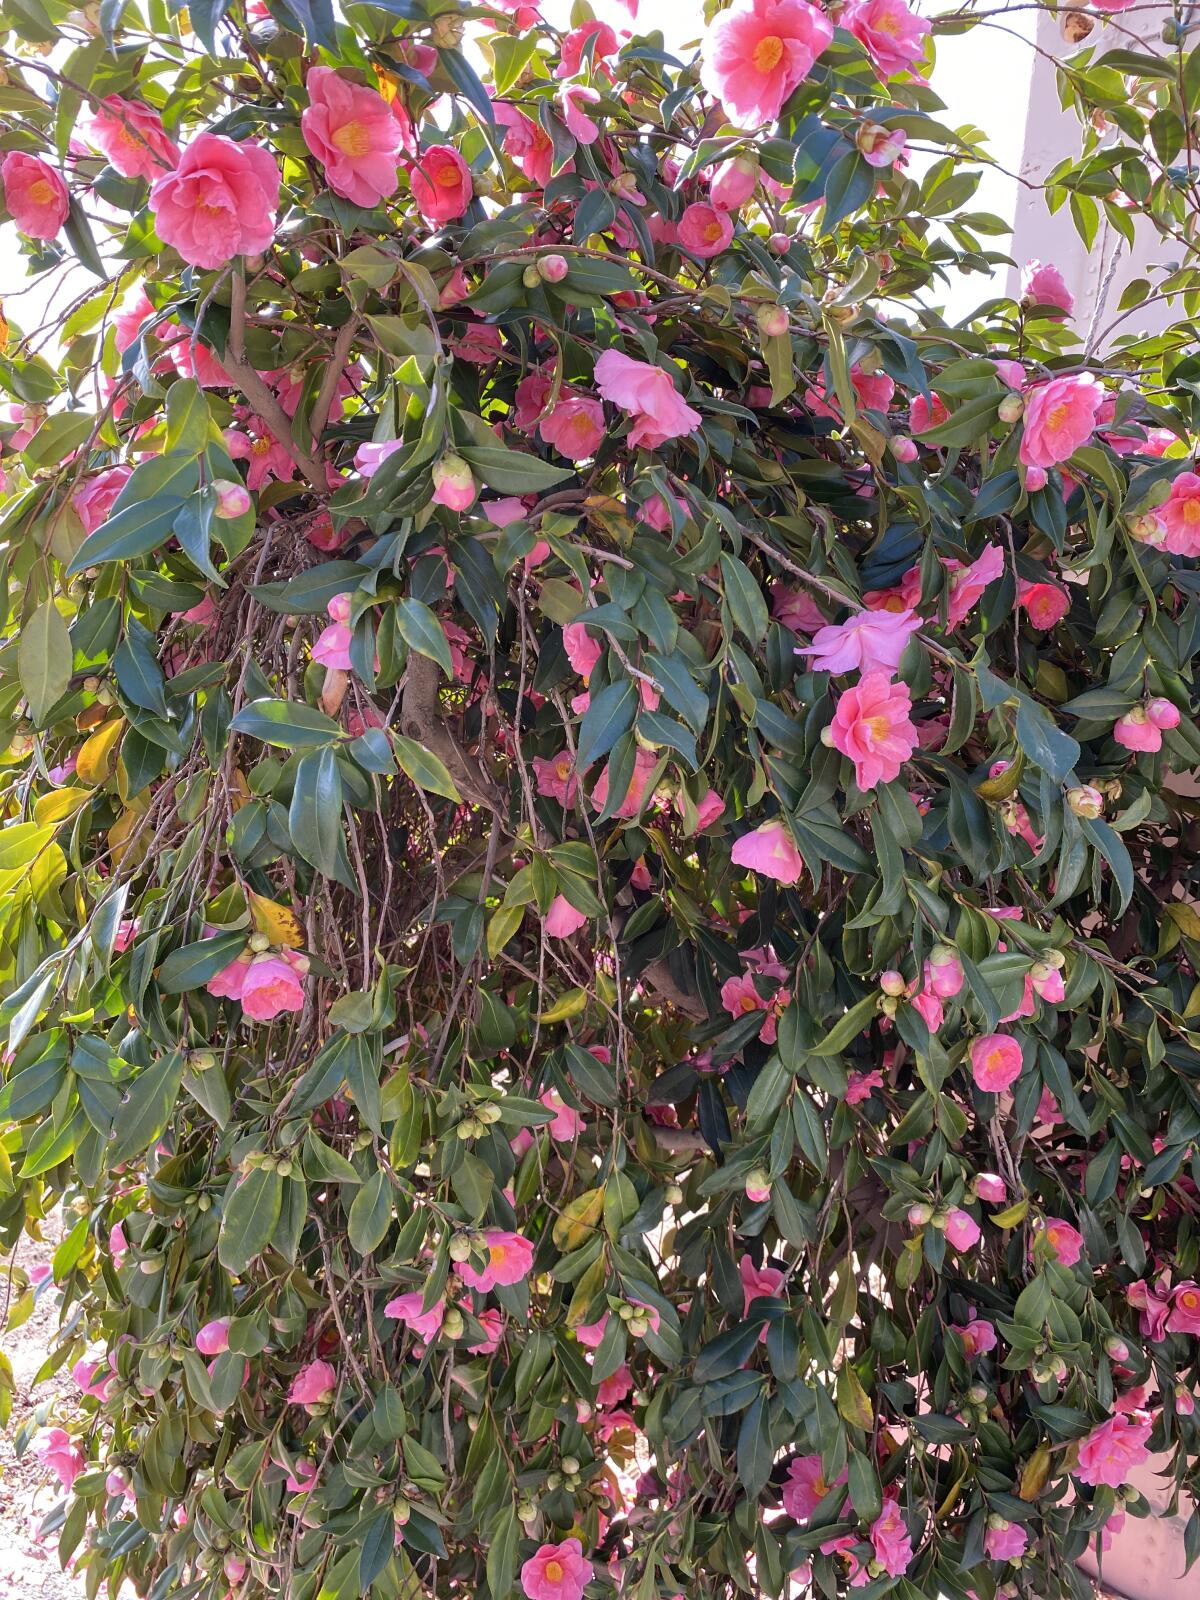 A tall, blooming camellia bush.